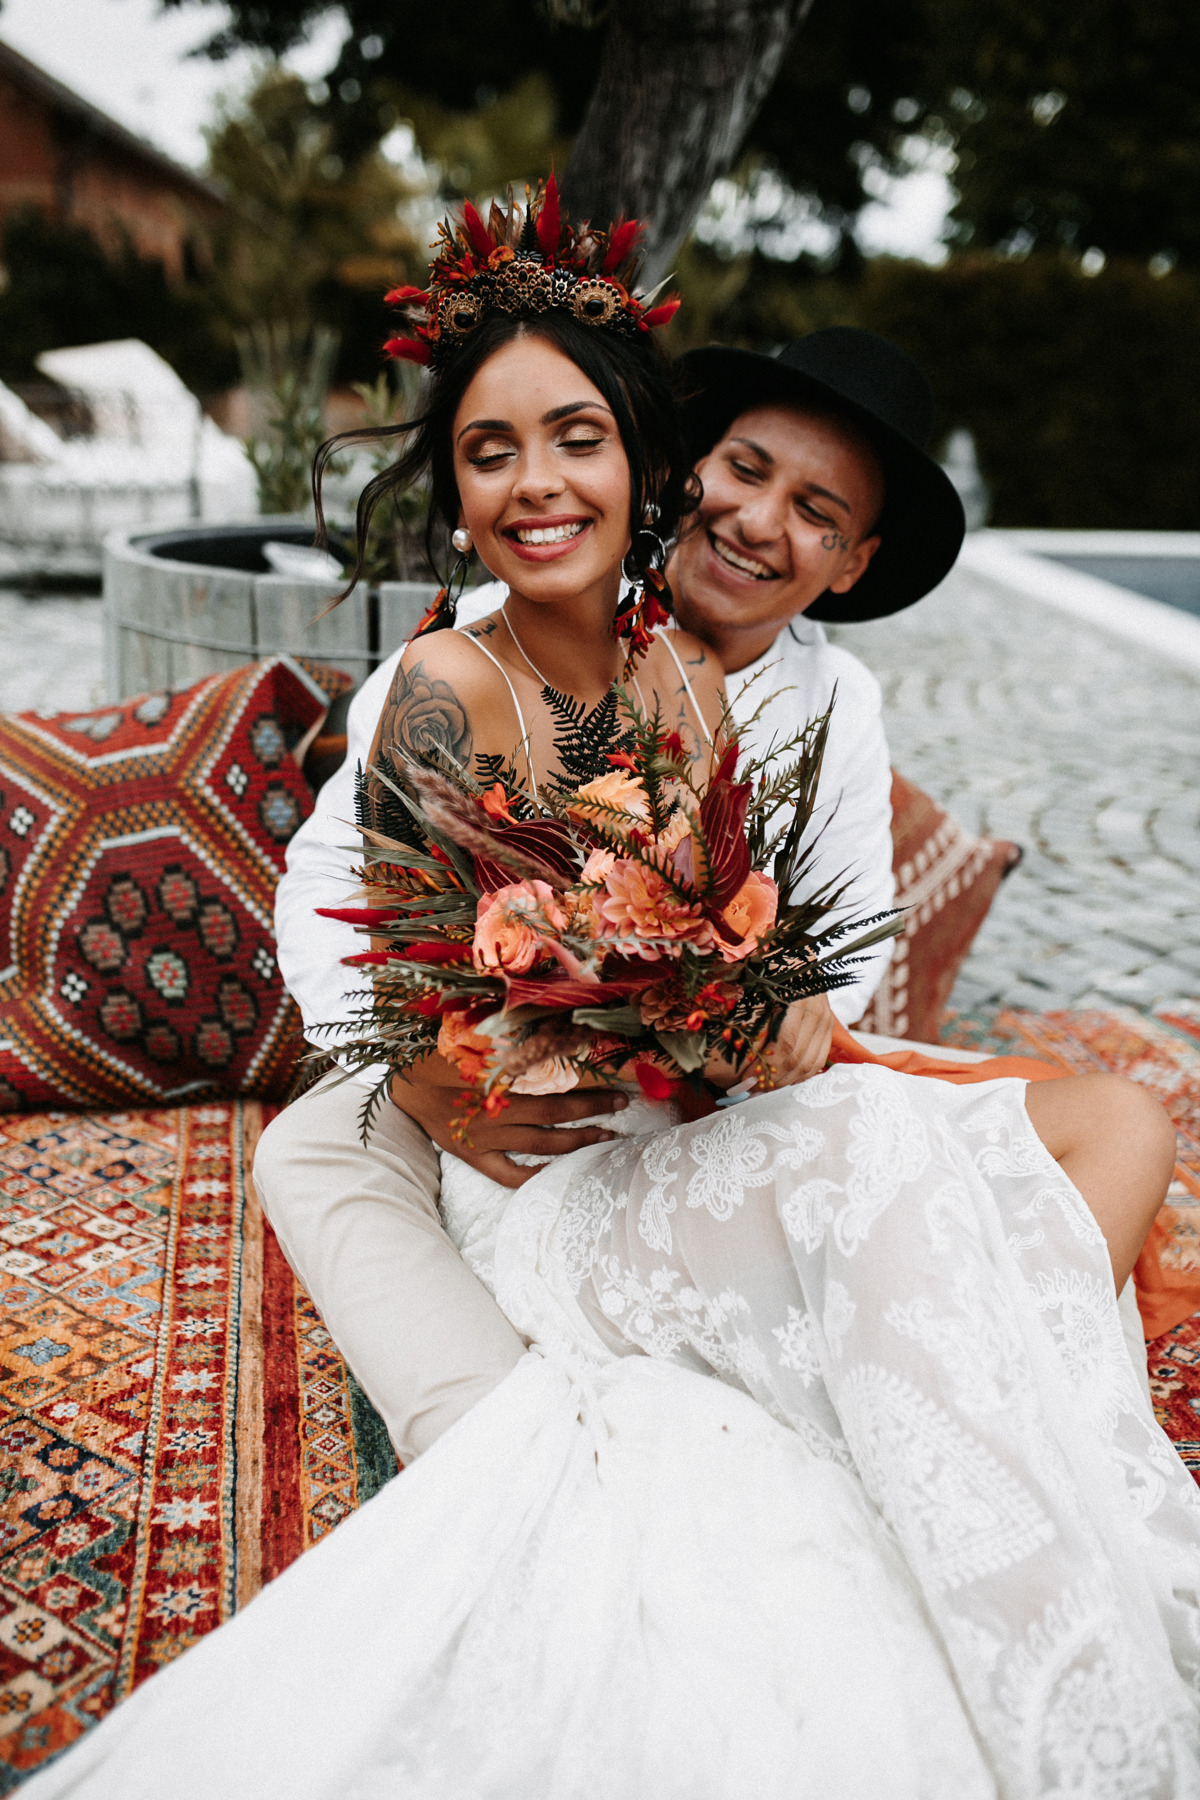 A Steamy Spanish-Inspired Shoot Where Tattoos Are The New Must-Have Wedding Accessory